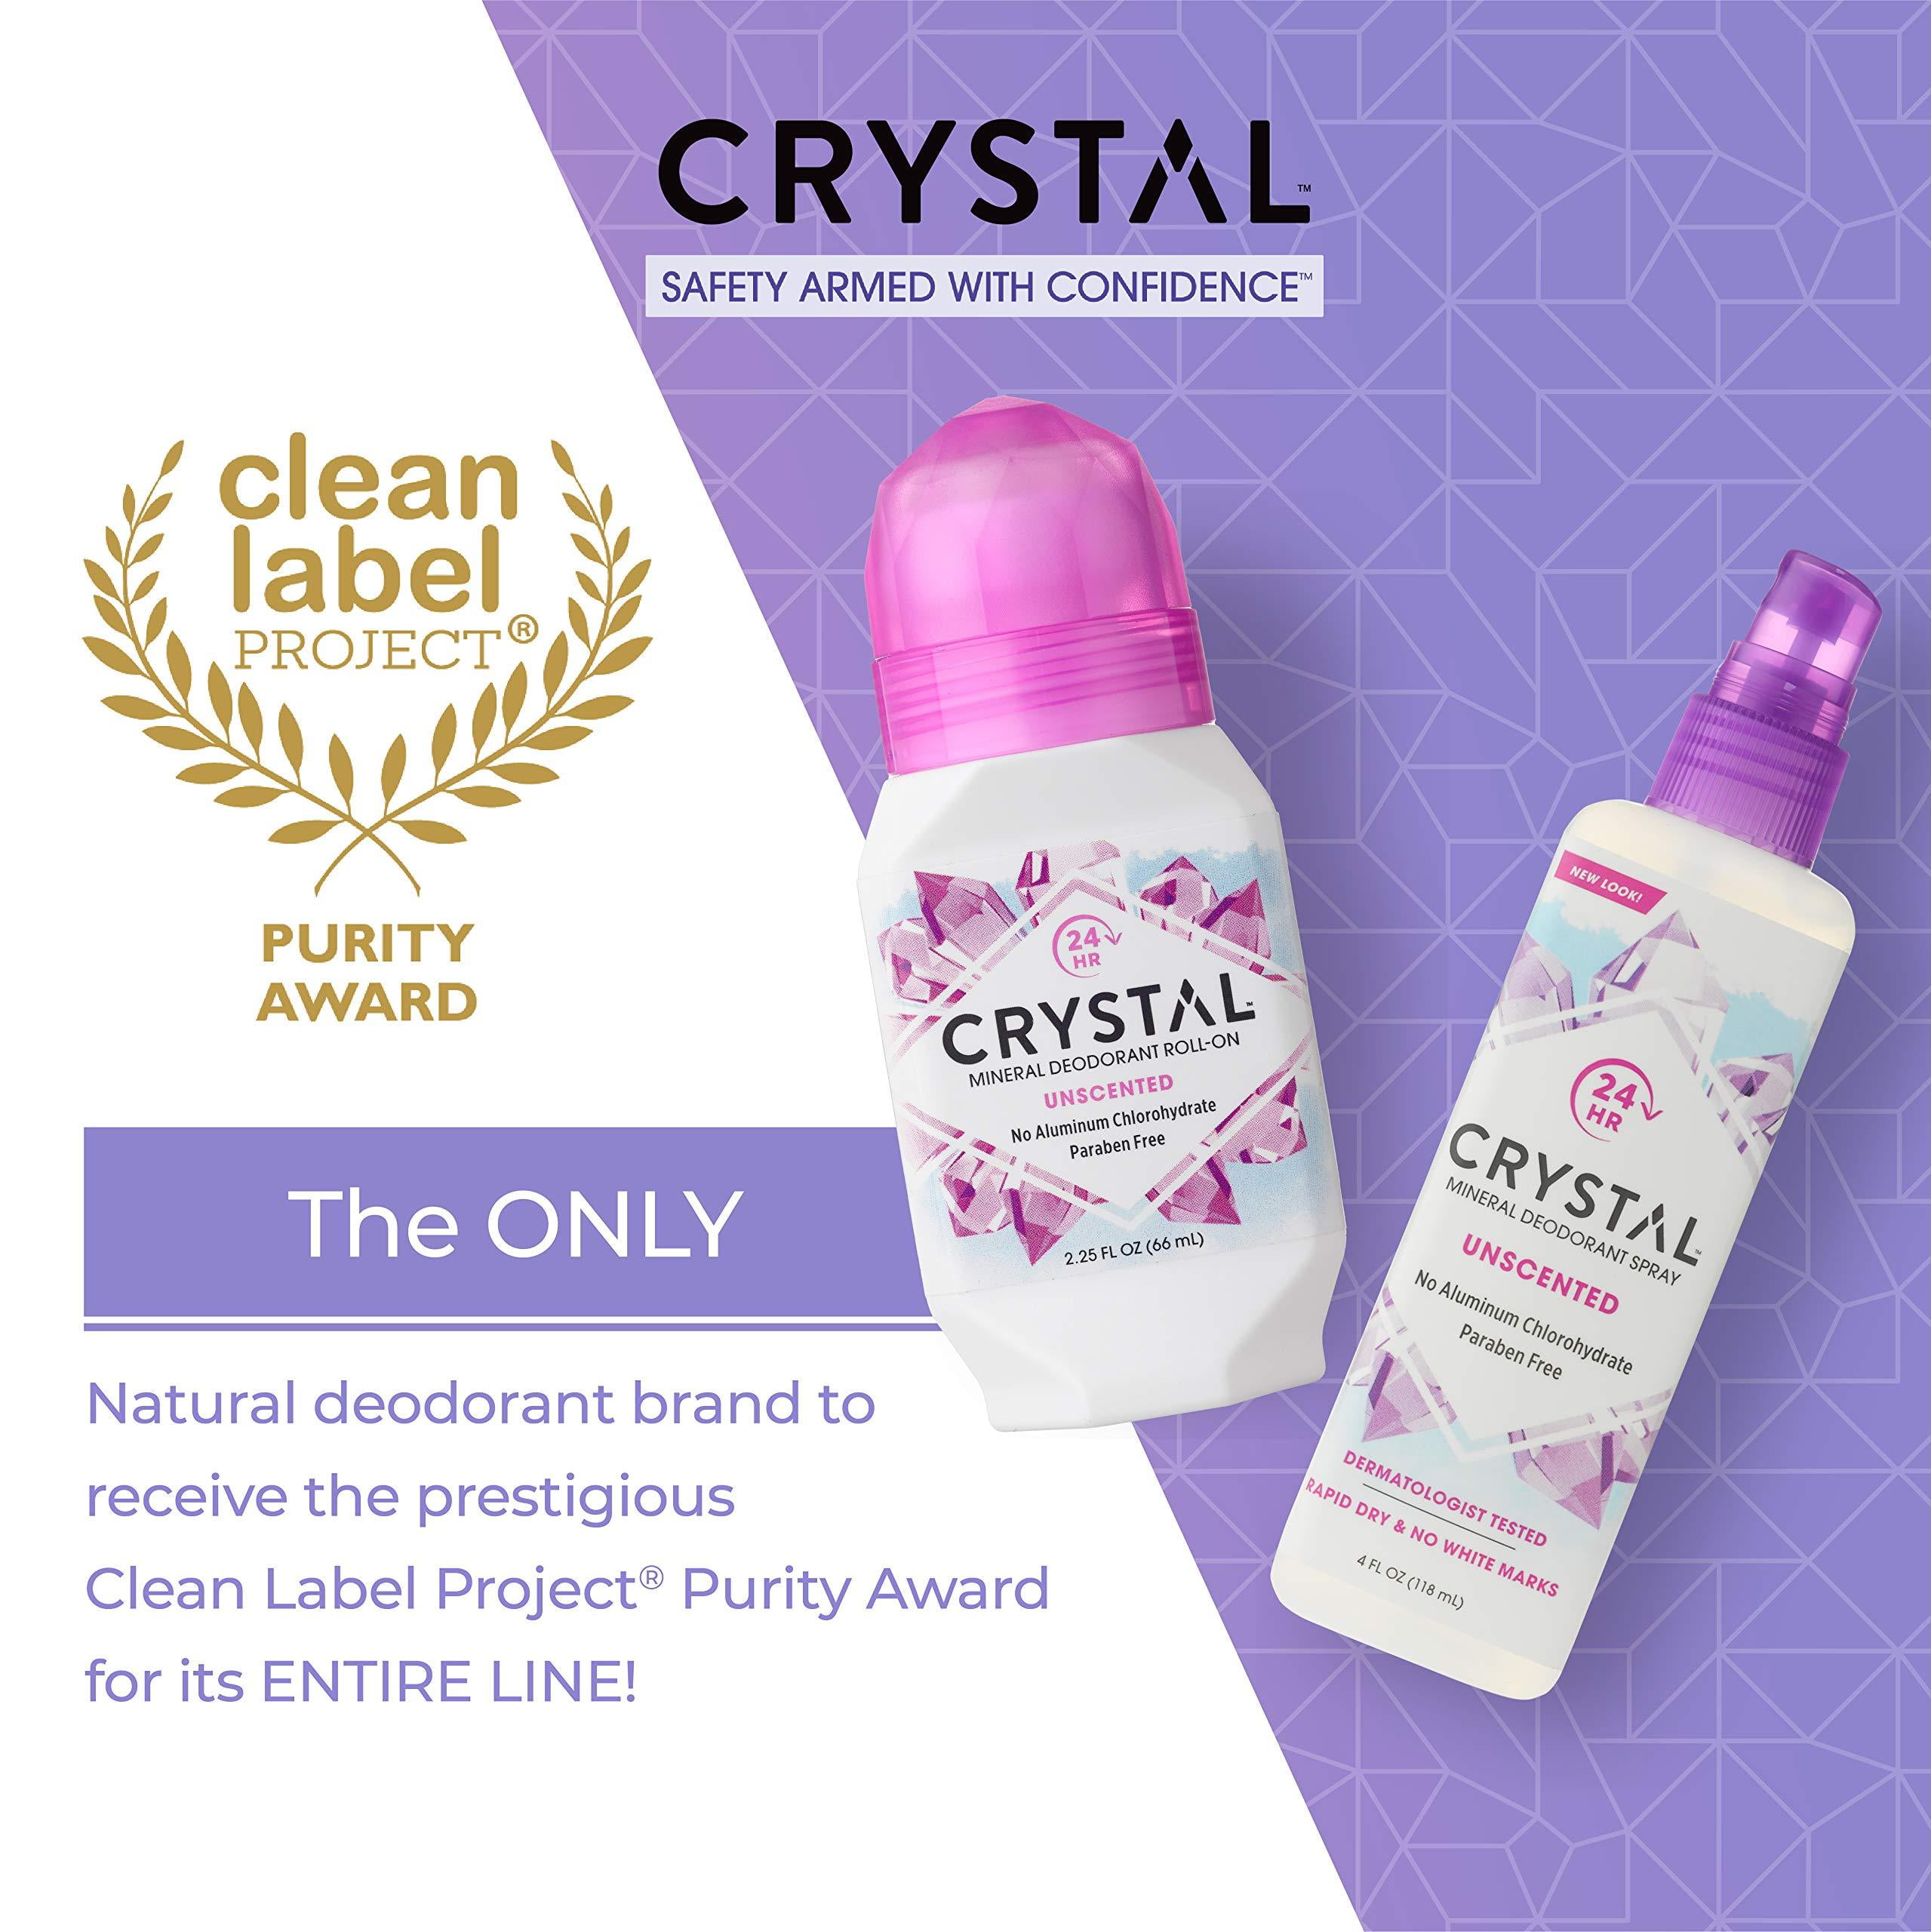 CRYSTAL - Mineral Roll on Vegan Deodorant for Women and Men, Unscented - 2.25 fl. oz. (3 Pack) (Packaging May Vary) - Walmart.com